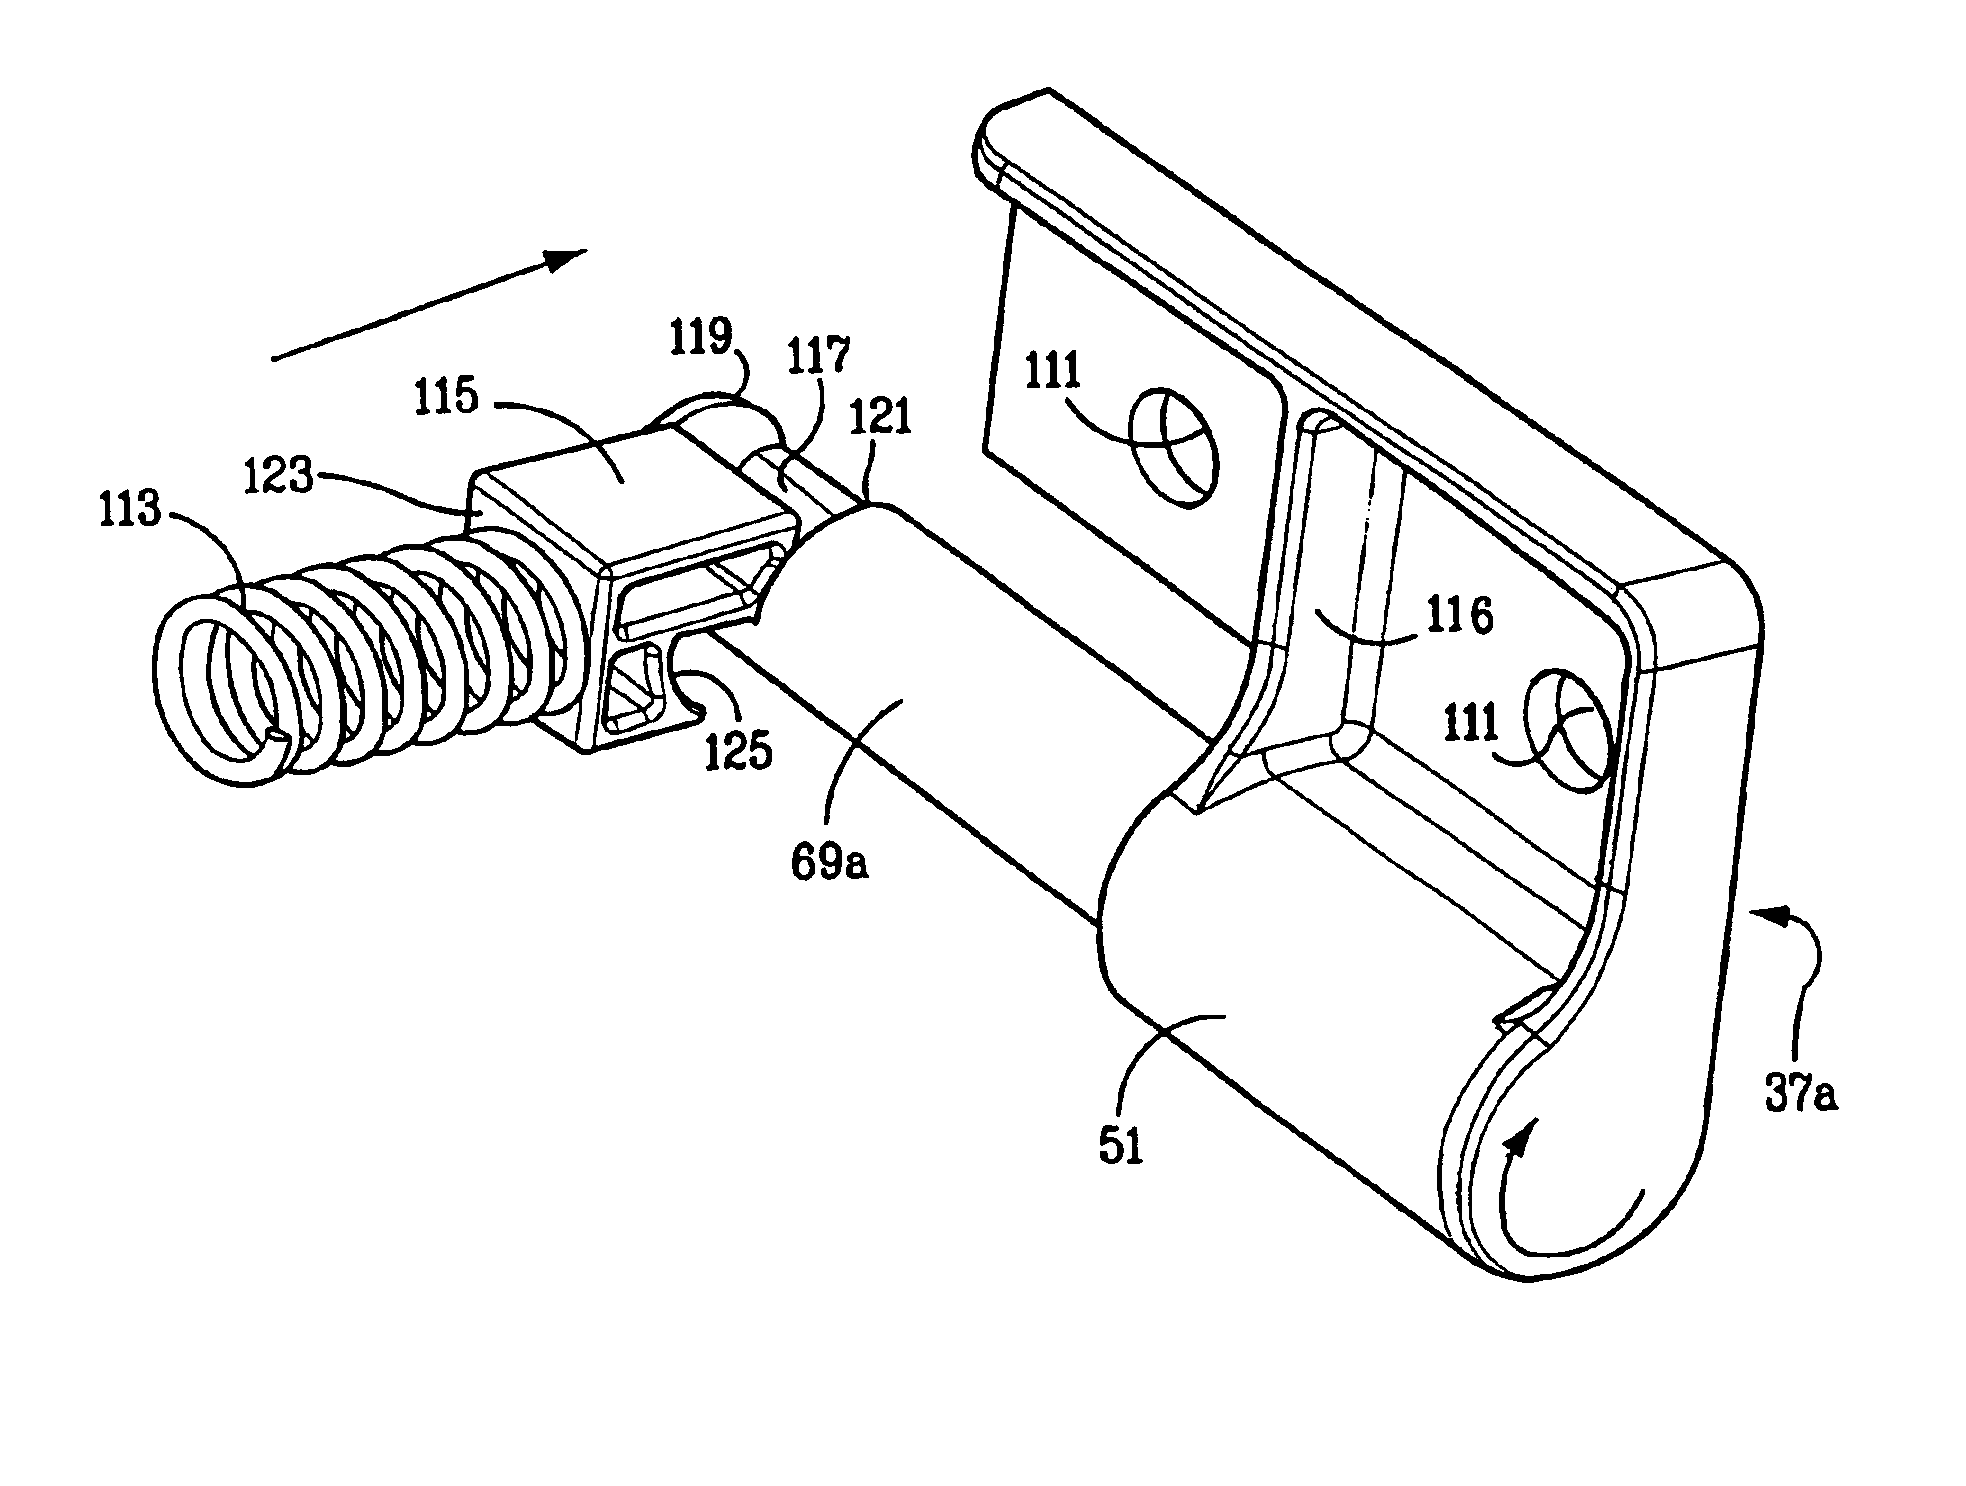 Hinge device with detent